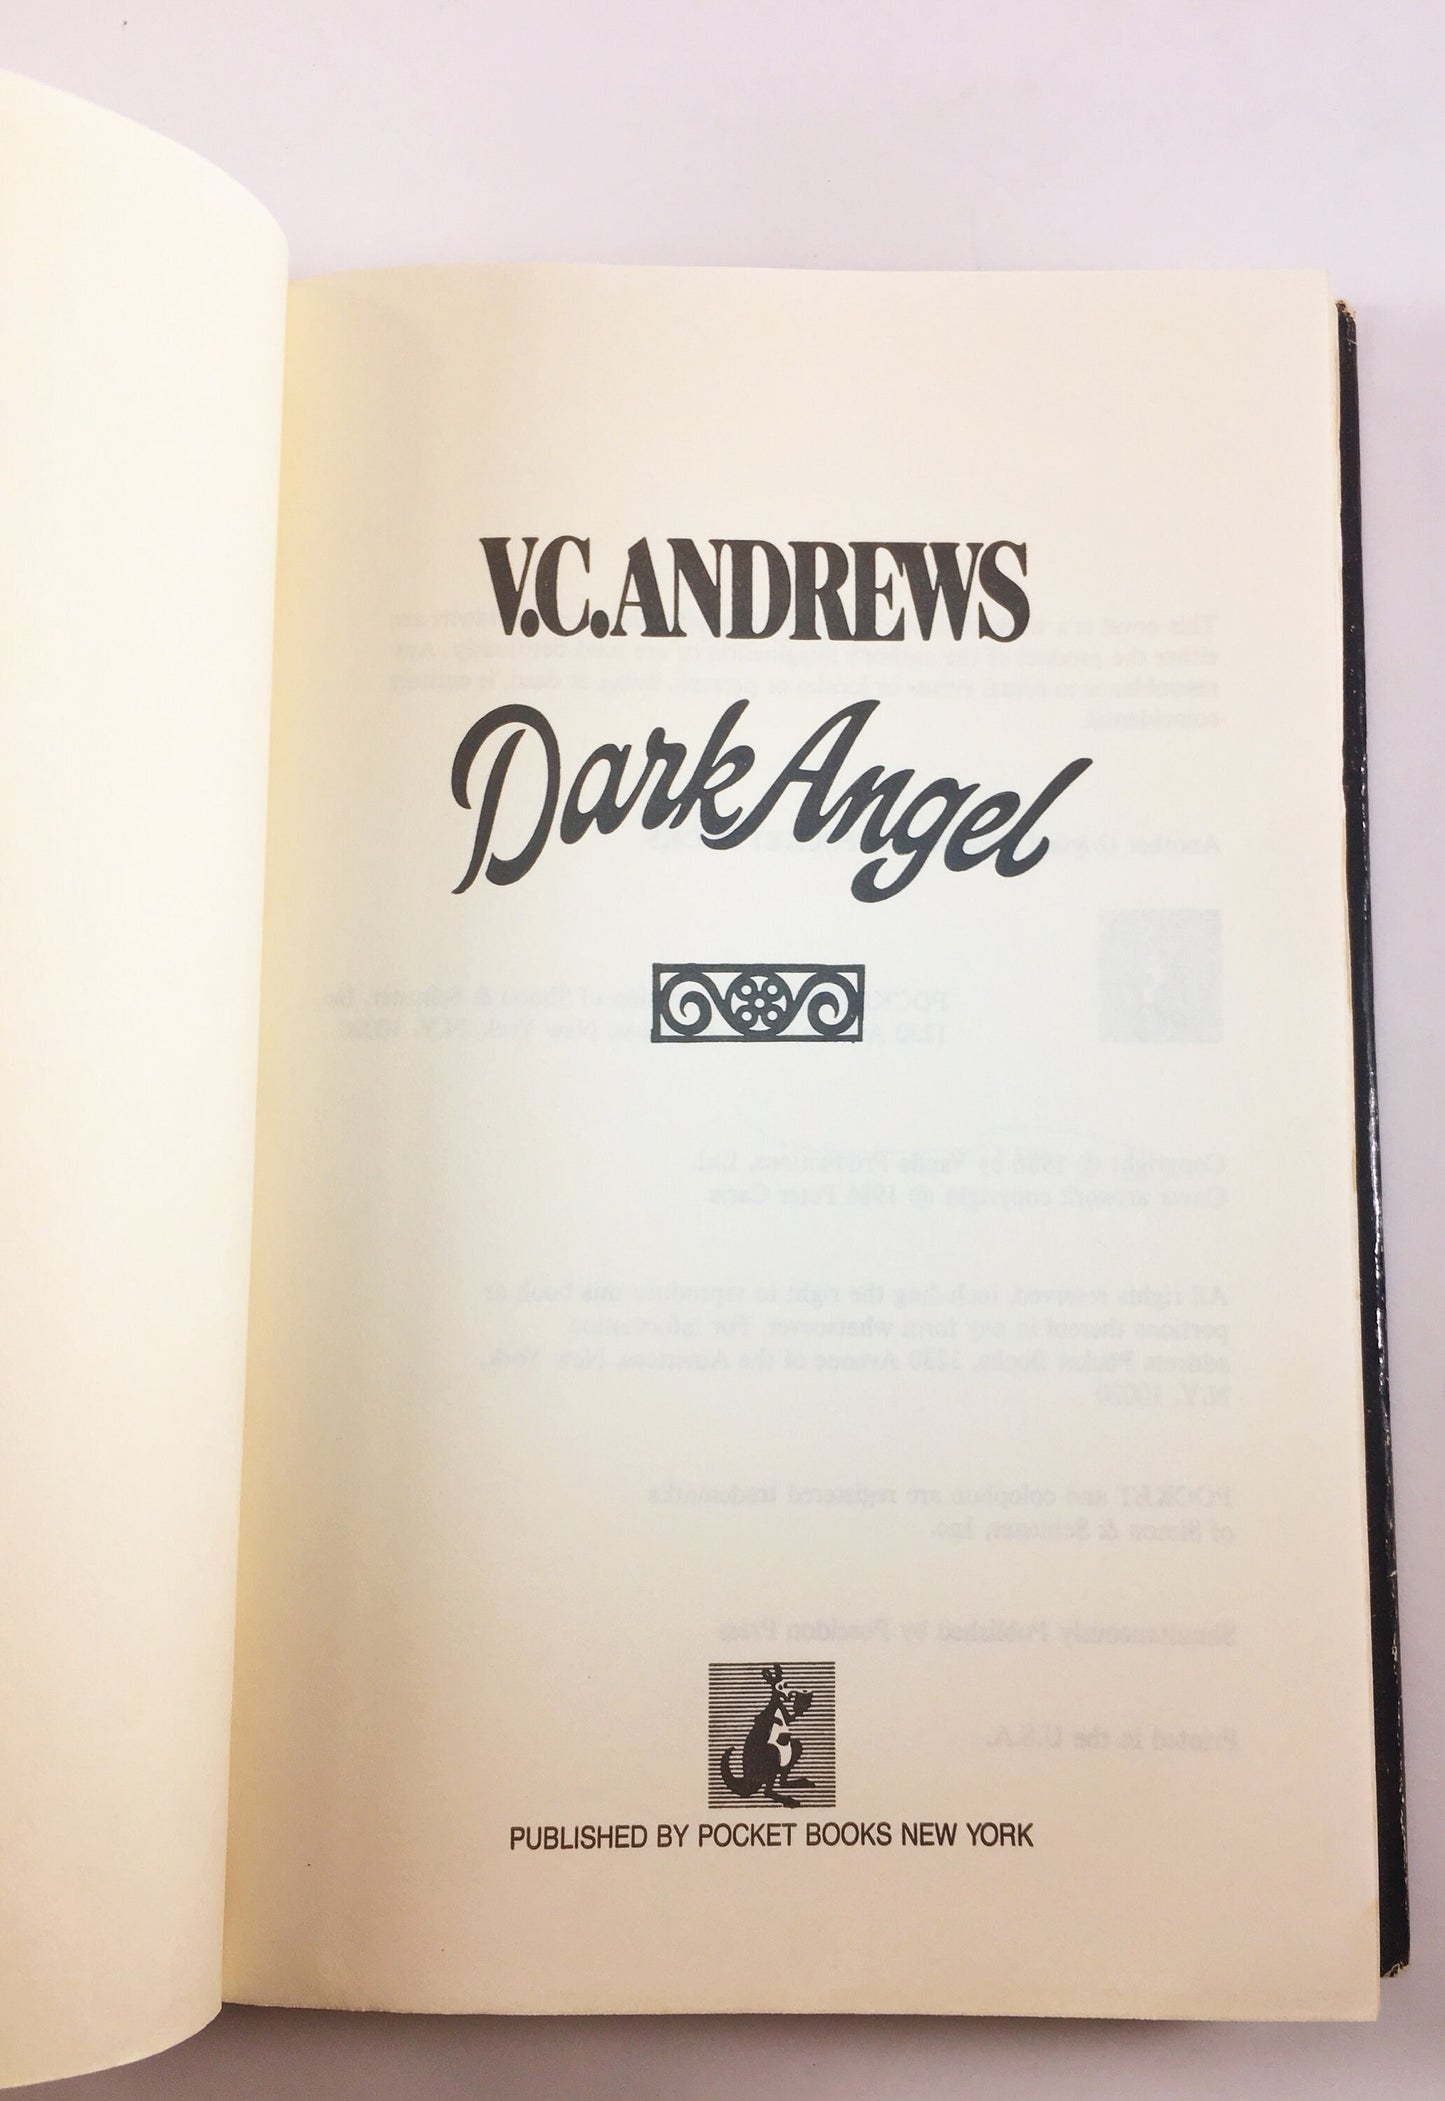 Dark Angel by VC Andrews vintage book circa 1986. BCE Second book in the Casteel Series.